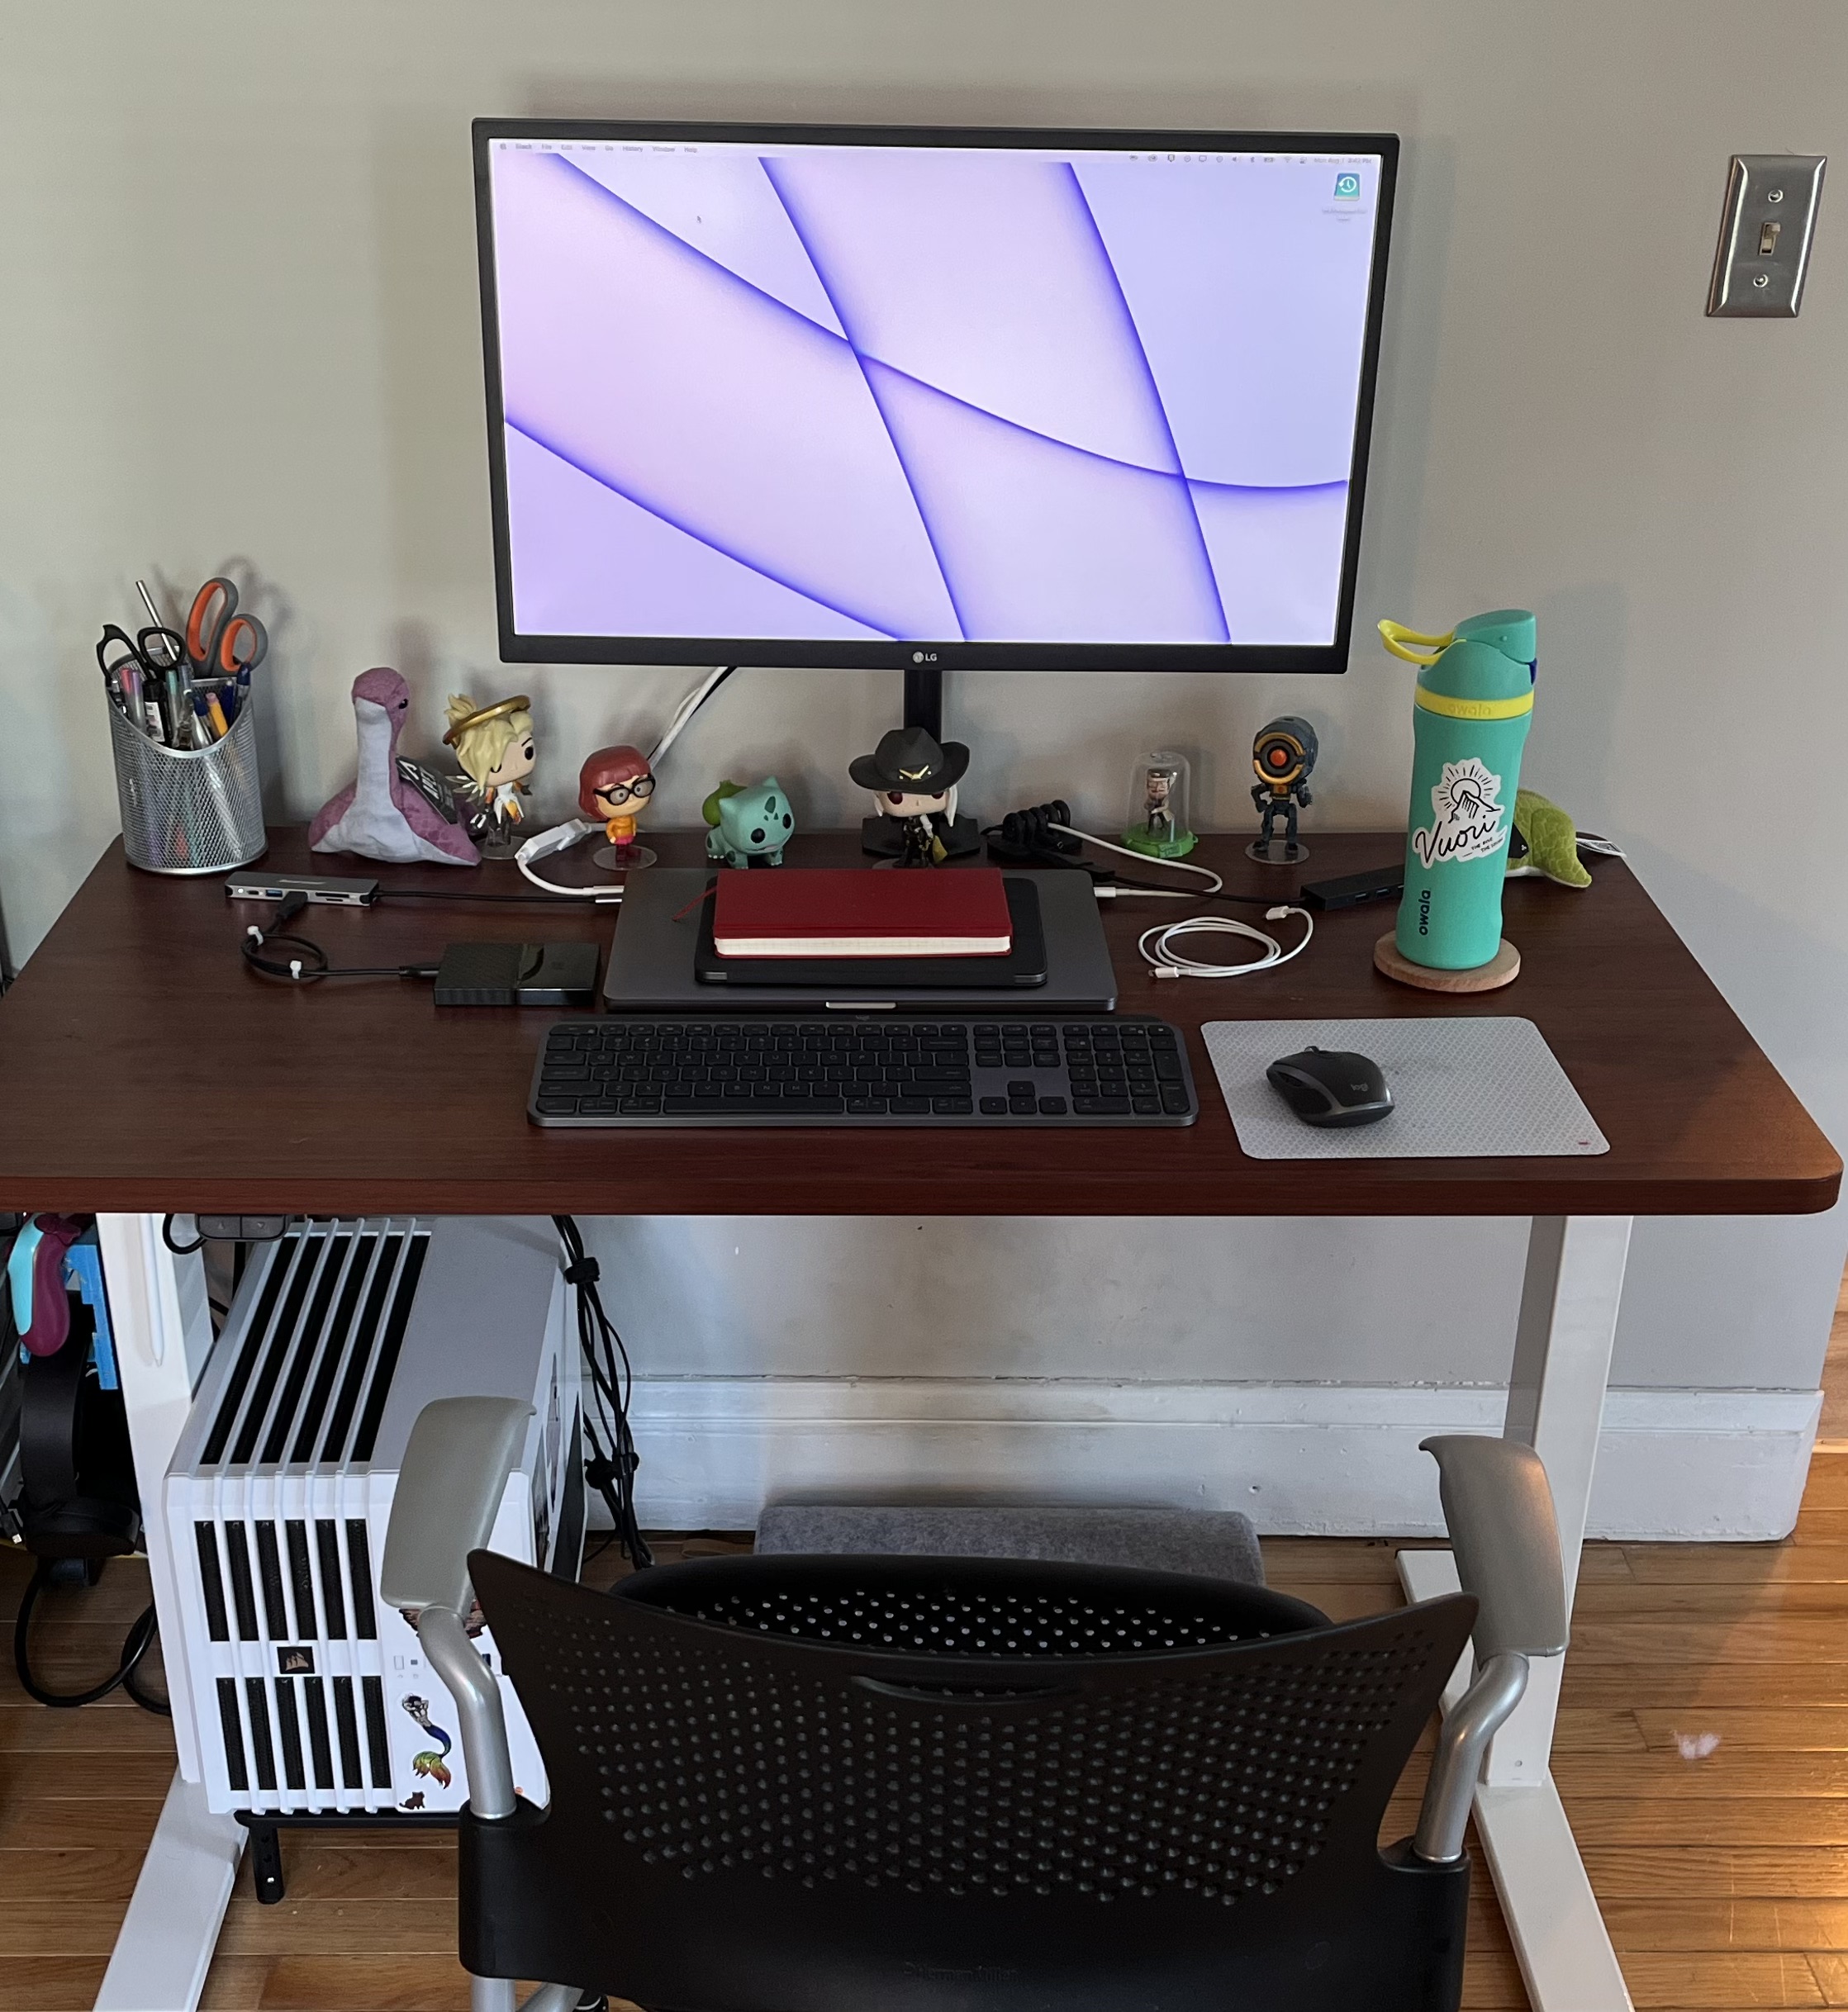 My Work from Home Setup